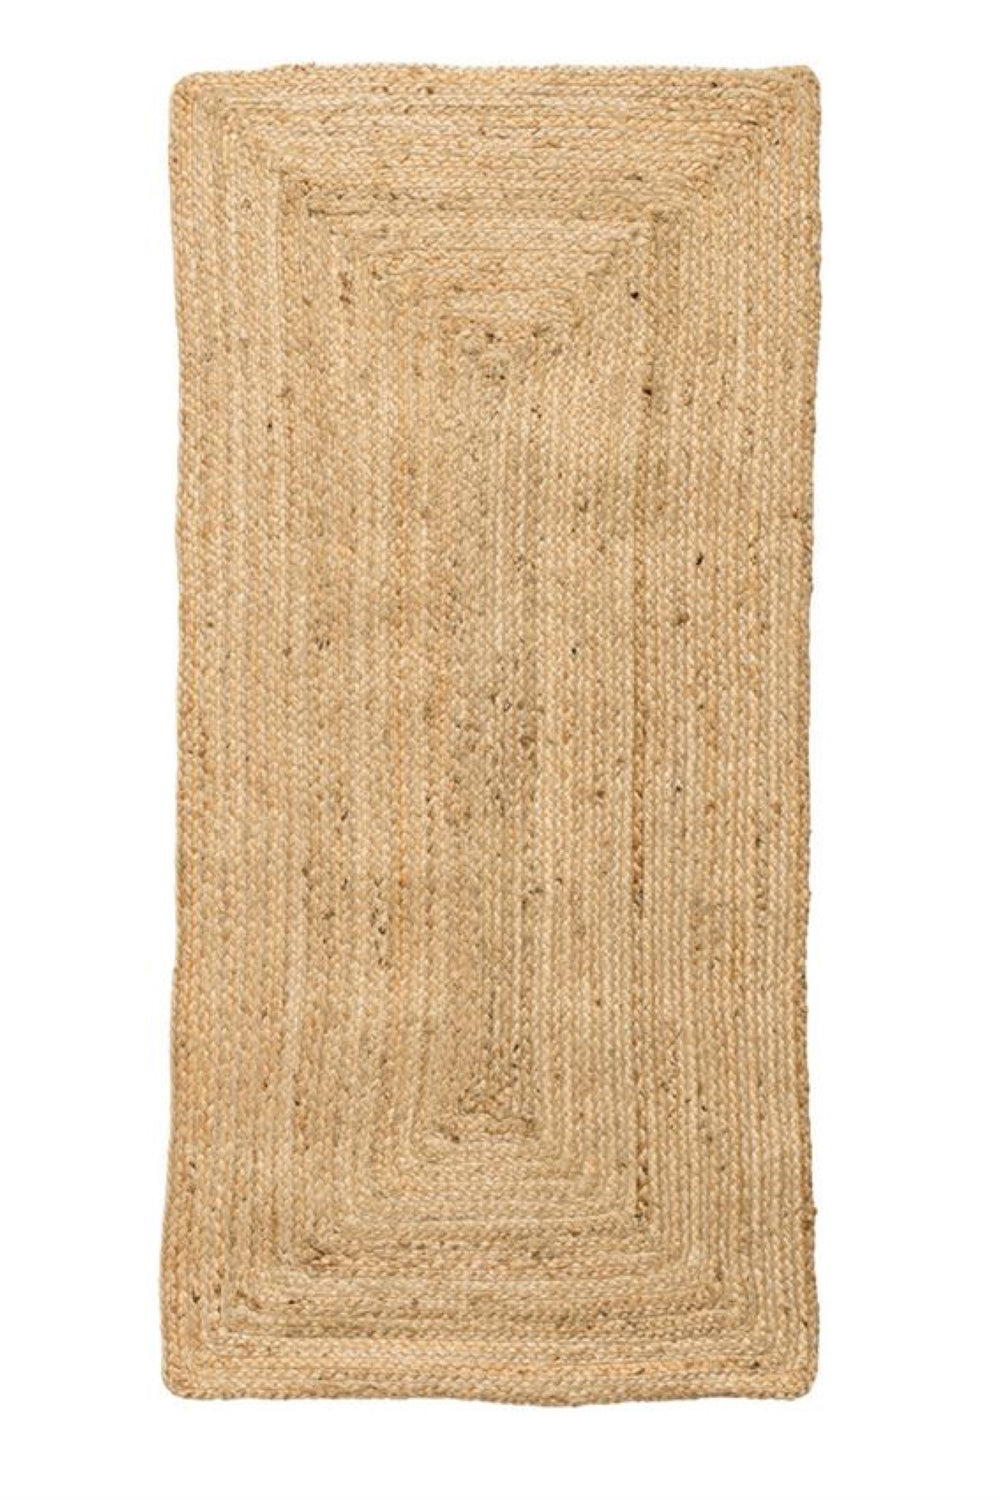 Small Natural Seagrass Rug